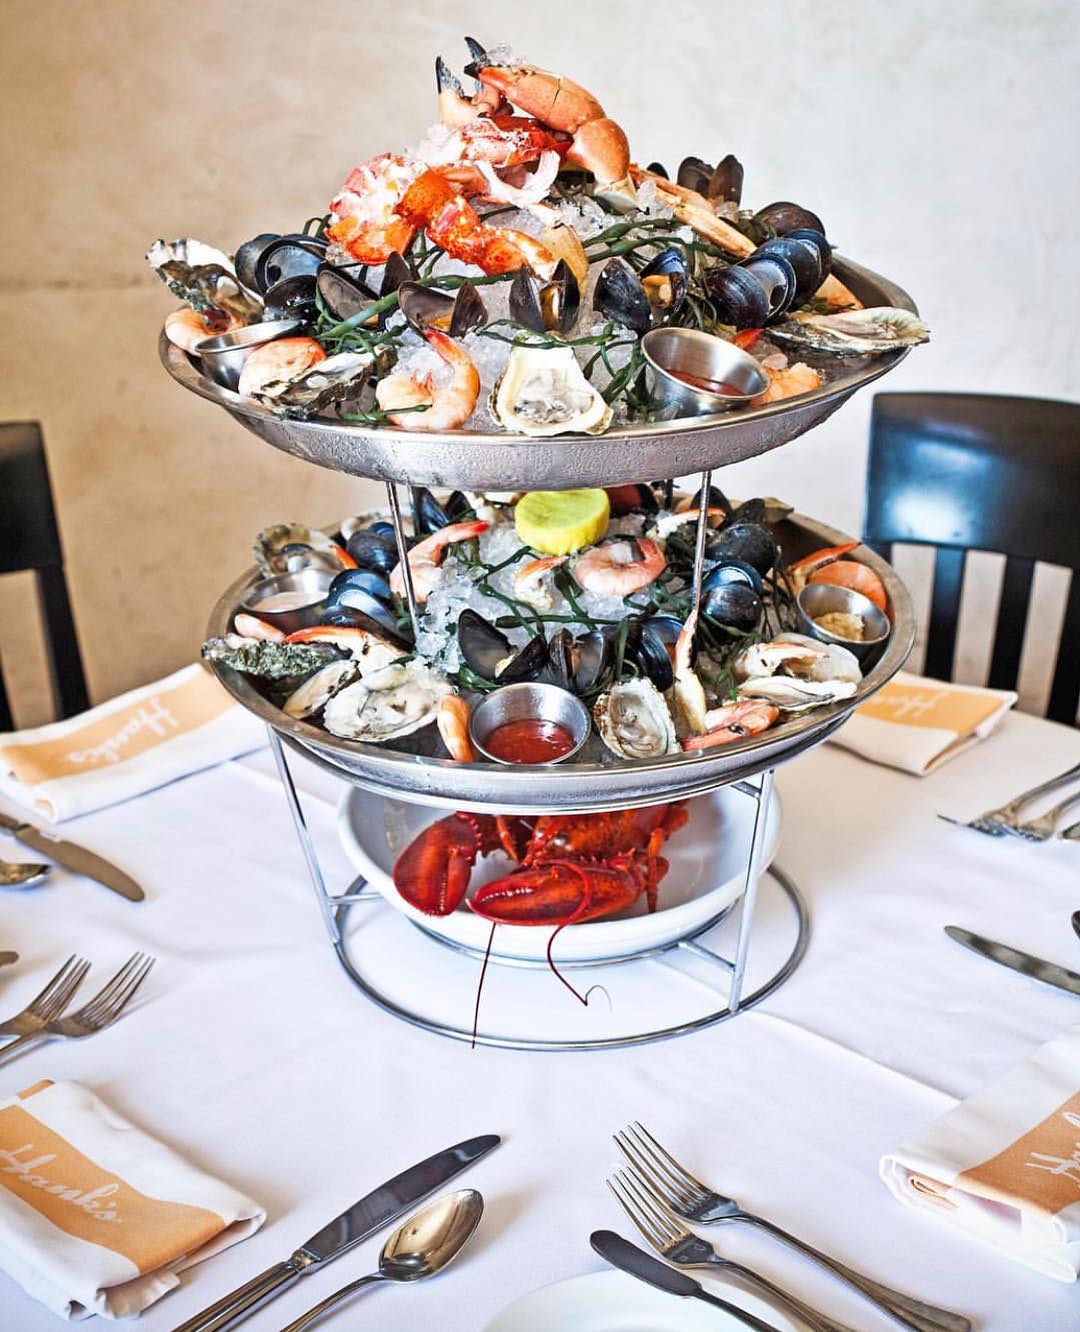 Multiple types of seafood piles on a multi-tiered serving tray. Photo by Instagram user @hanksseafood